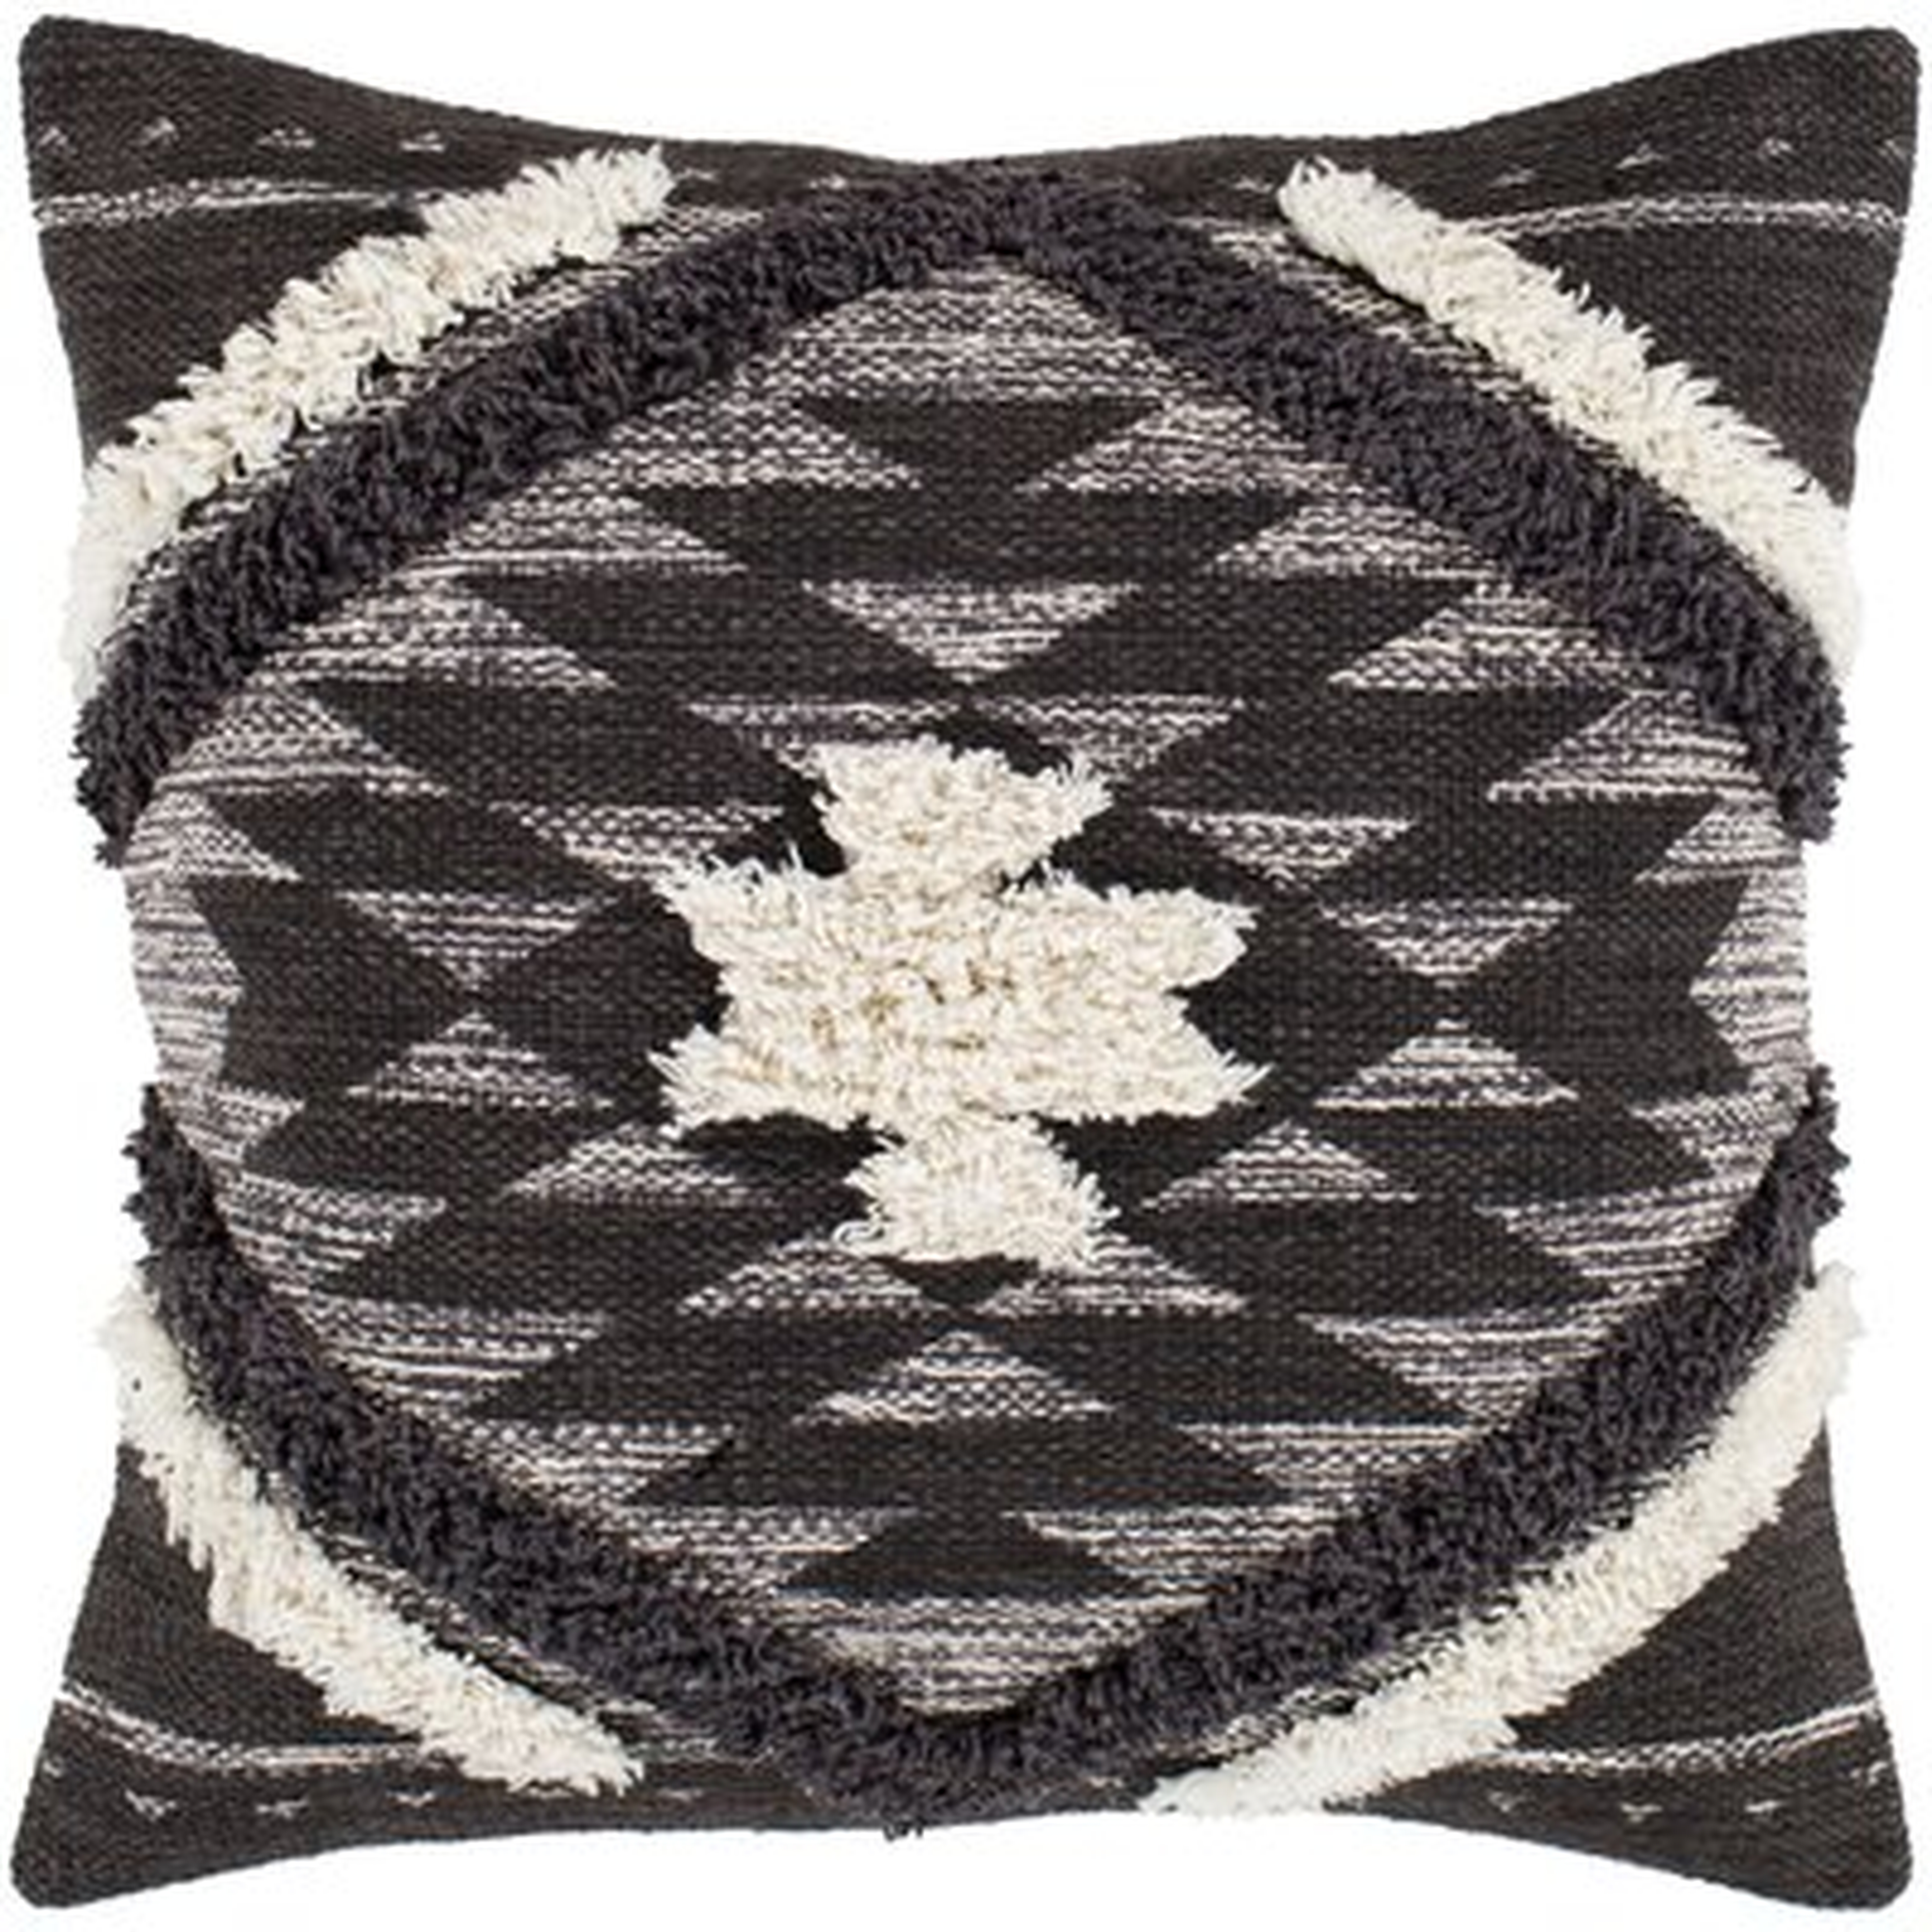 Orval Cotton Throw Pillow Cover (COVER ONLY) - Wayfair